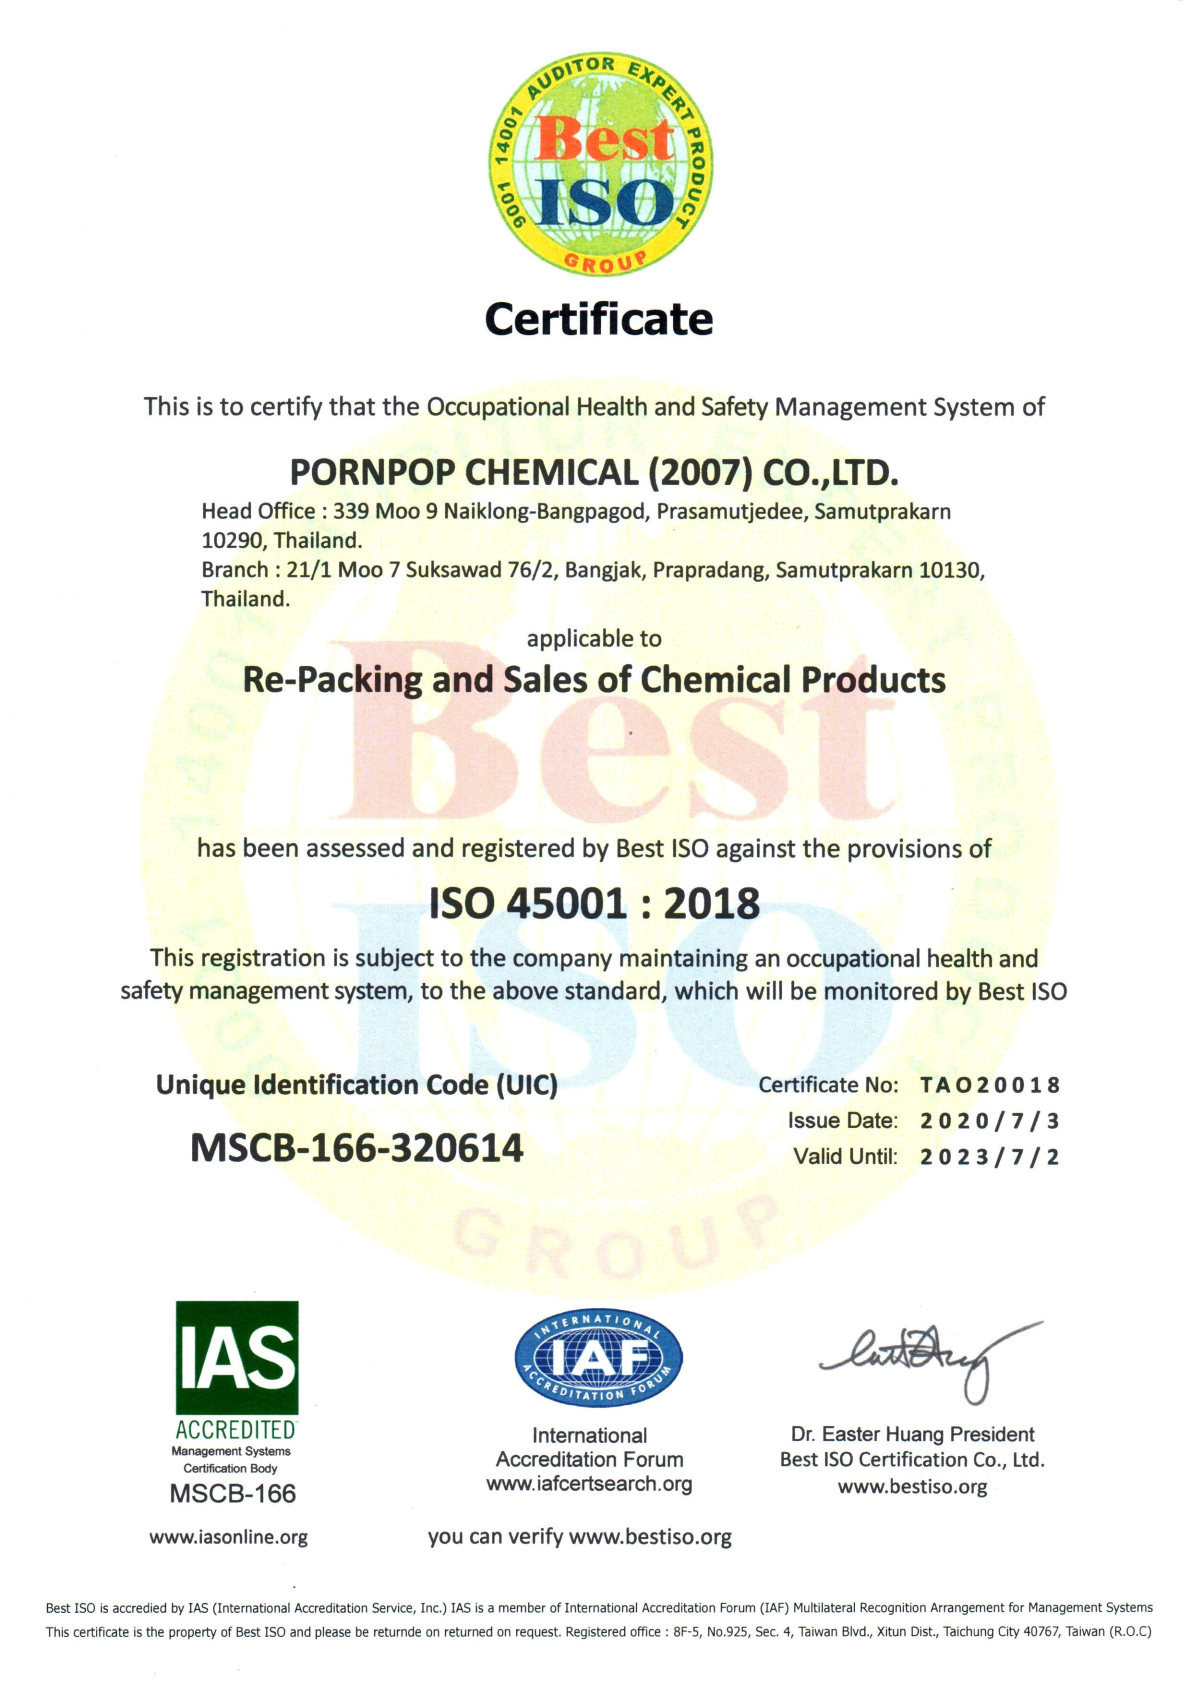 ISO 45001.2018